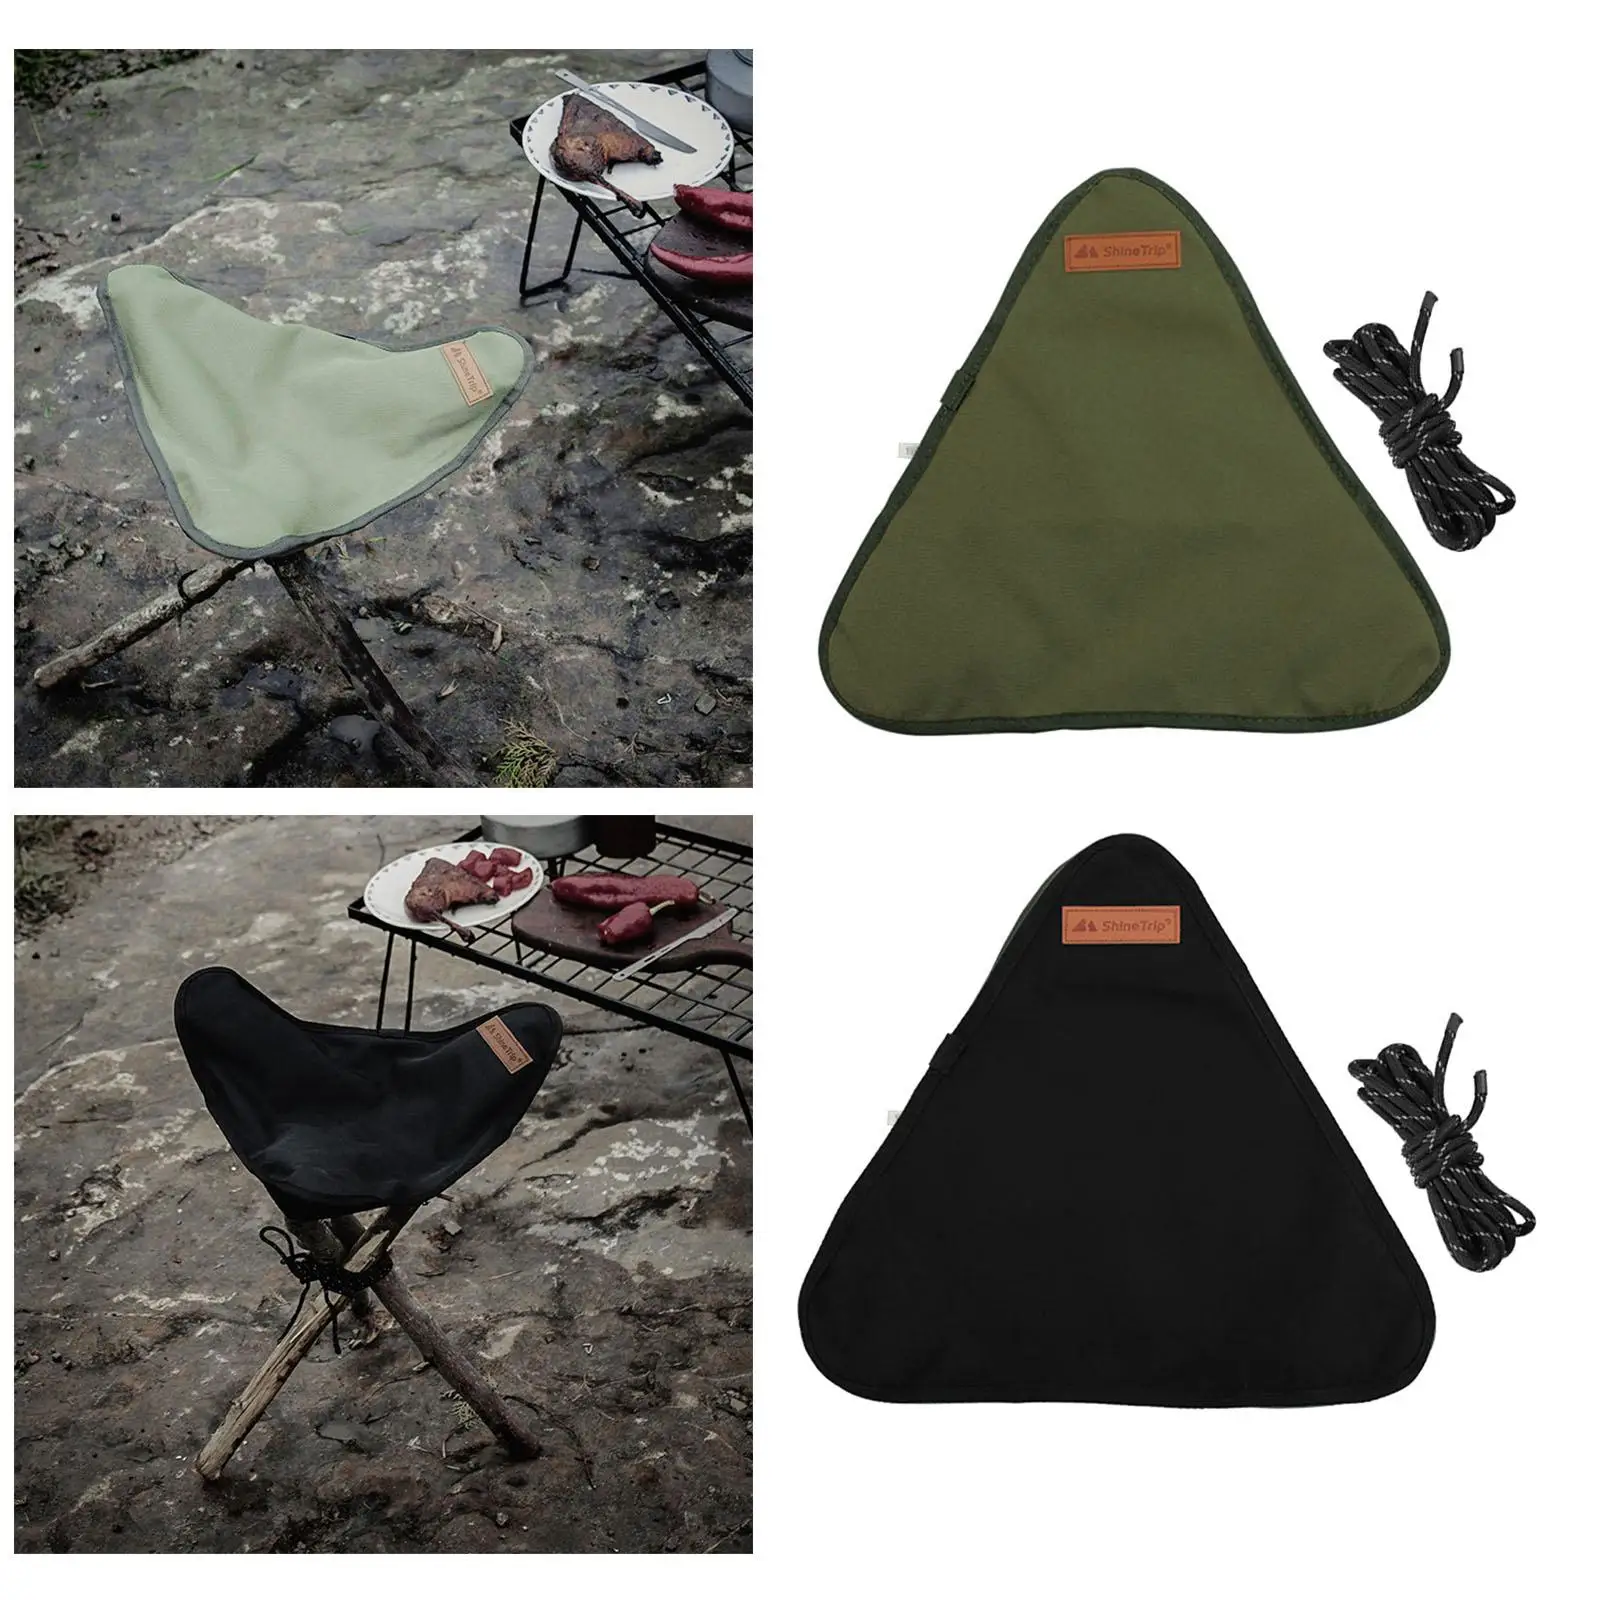 Folding Tripod Stool Cloth Lightweight Waterproof 3 Legs Chair Portable Seat Cover for Outdoor Camping Fishing BBQ Hiking